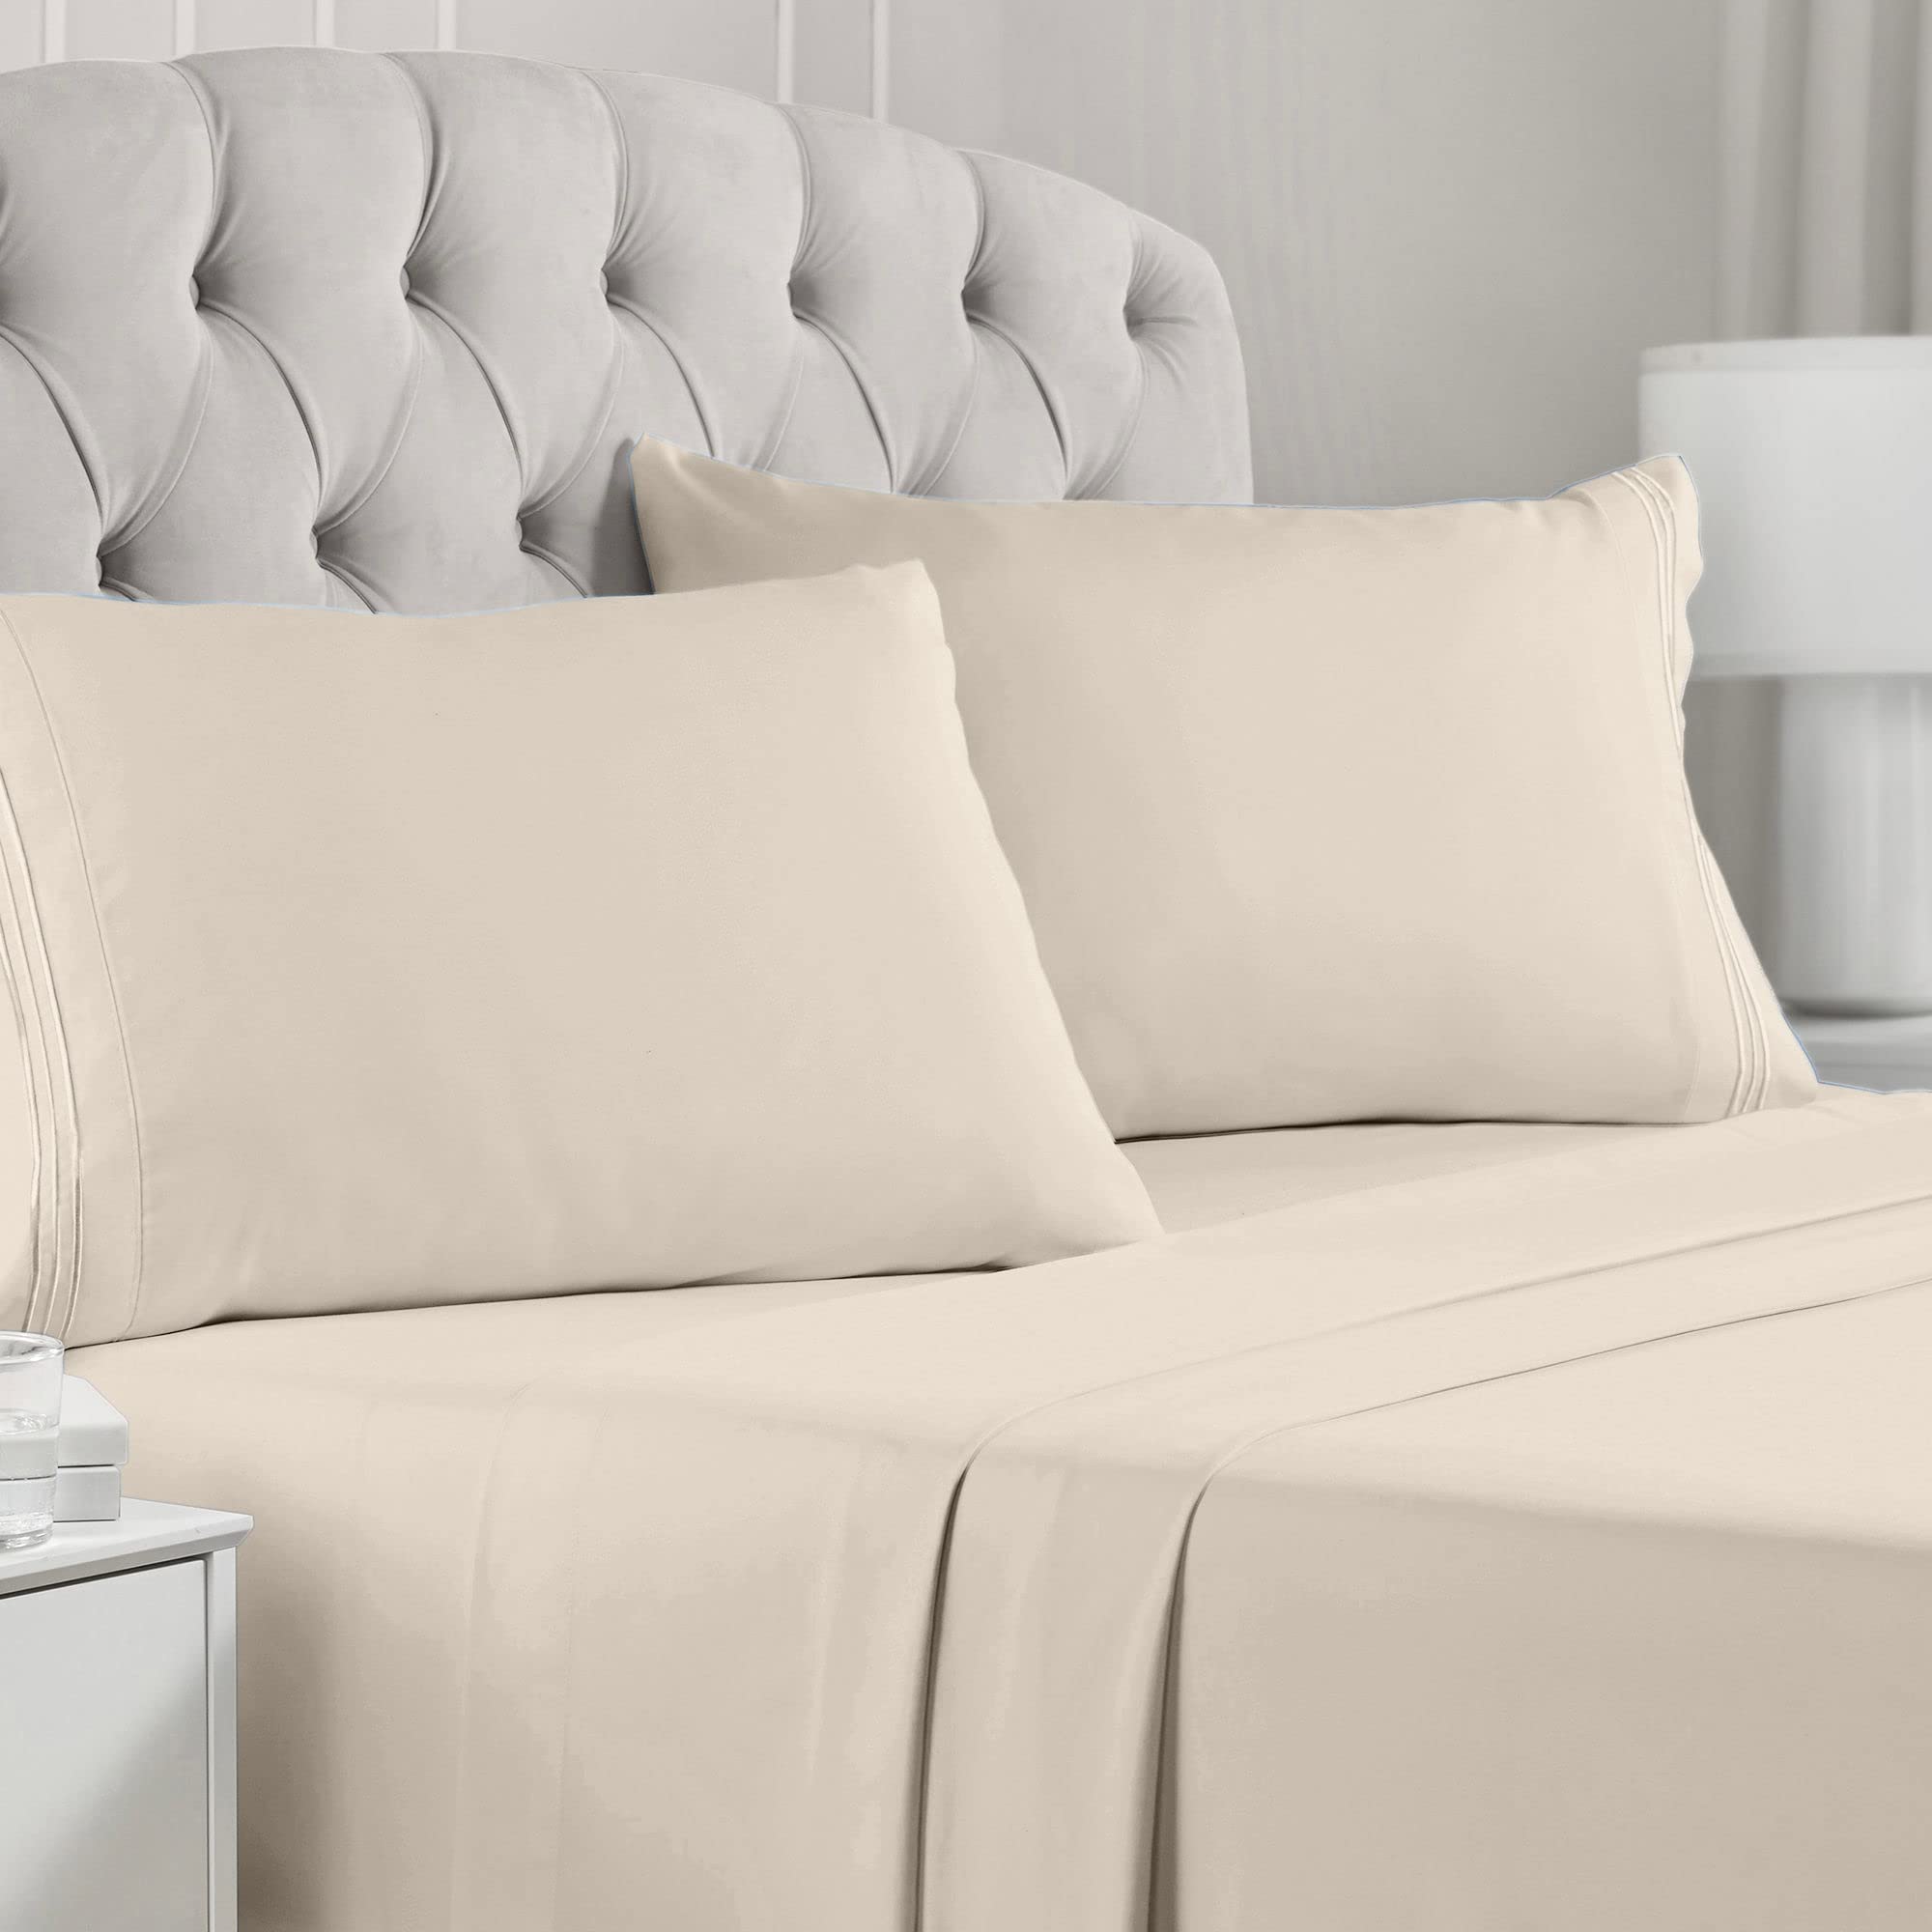 Book Cover Mellanni Queen Bed Sheets - Hotel Luxury 1800 Bedding Sheets & Pillowcases - Extra Soft Cooling Bed Sheets - Deep Pocket up to 16